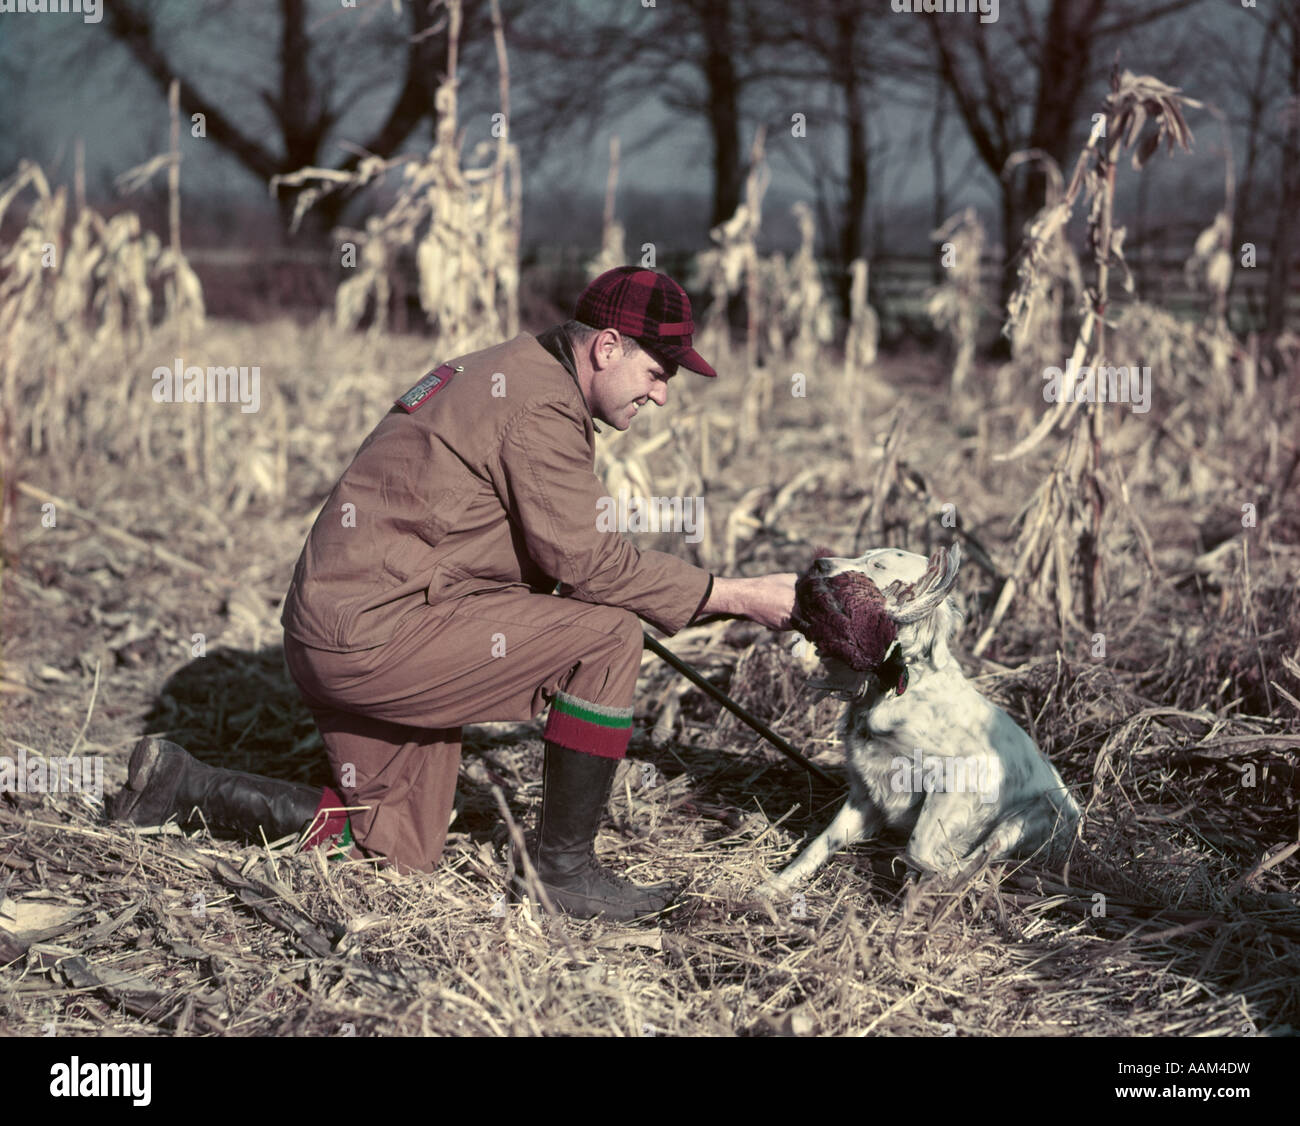 1950s MAN HUNTER KNEELING IN AUTUMN CORN FIELD ACCEPTING PHEASANT GAME BIRD FROM ENGLISH SETTER HUNTING DOG Stock Photo